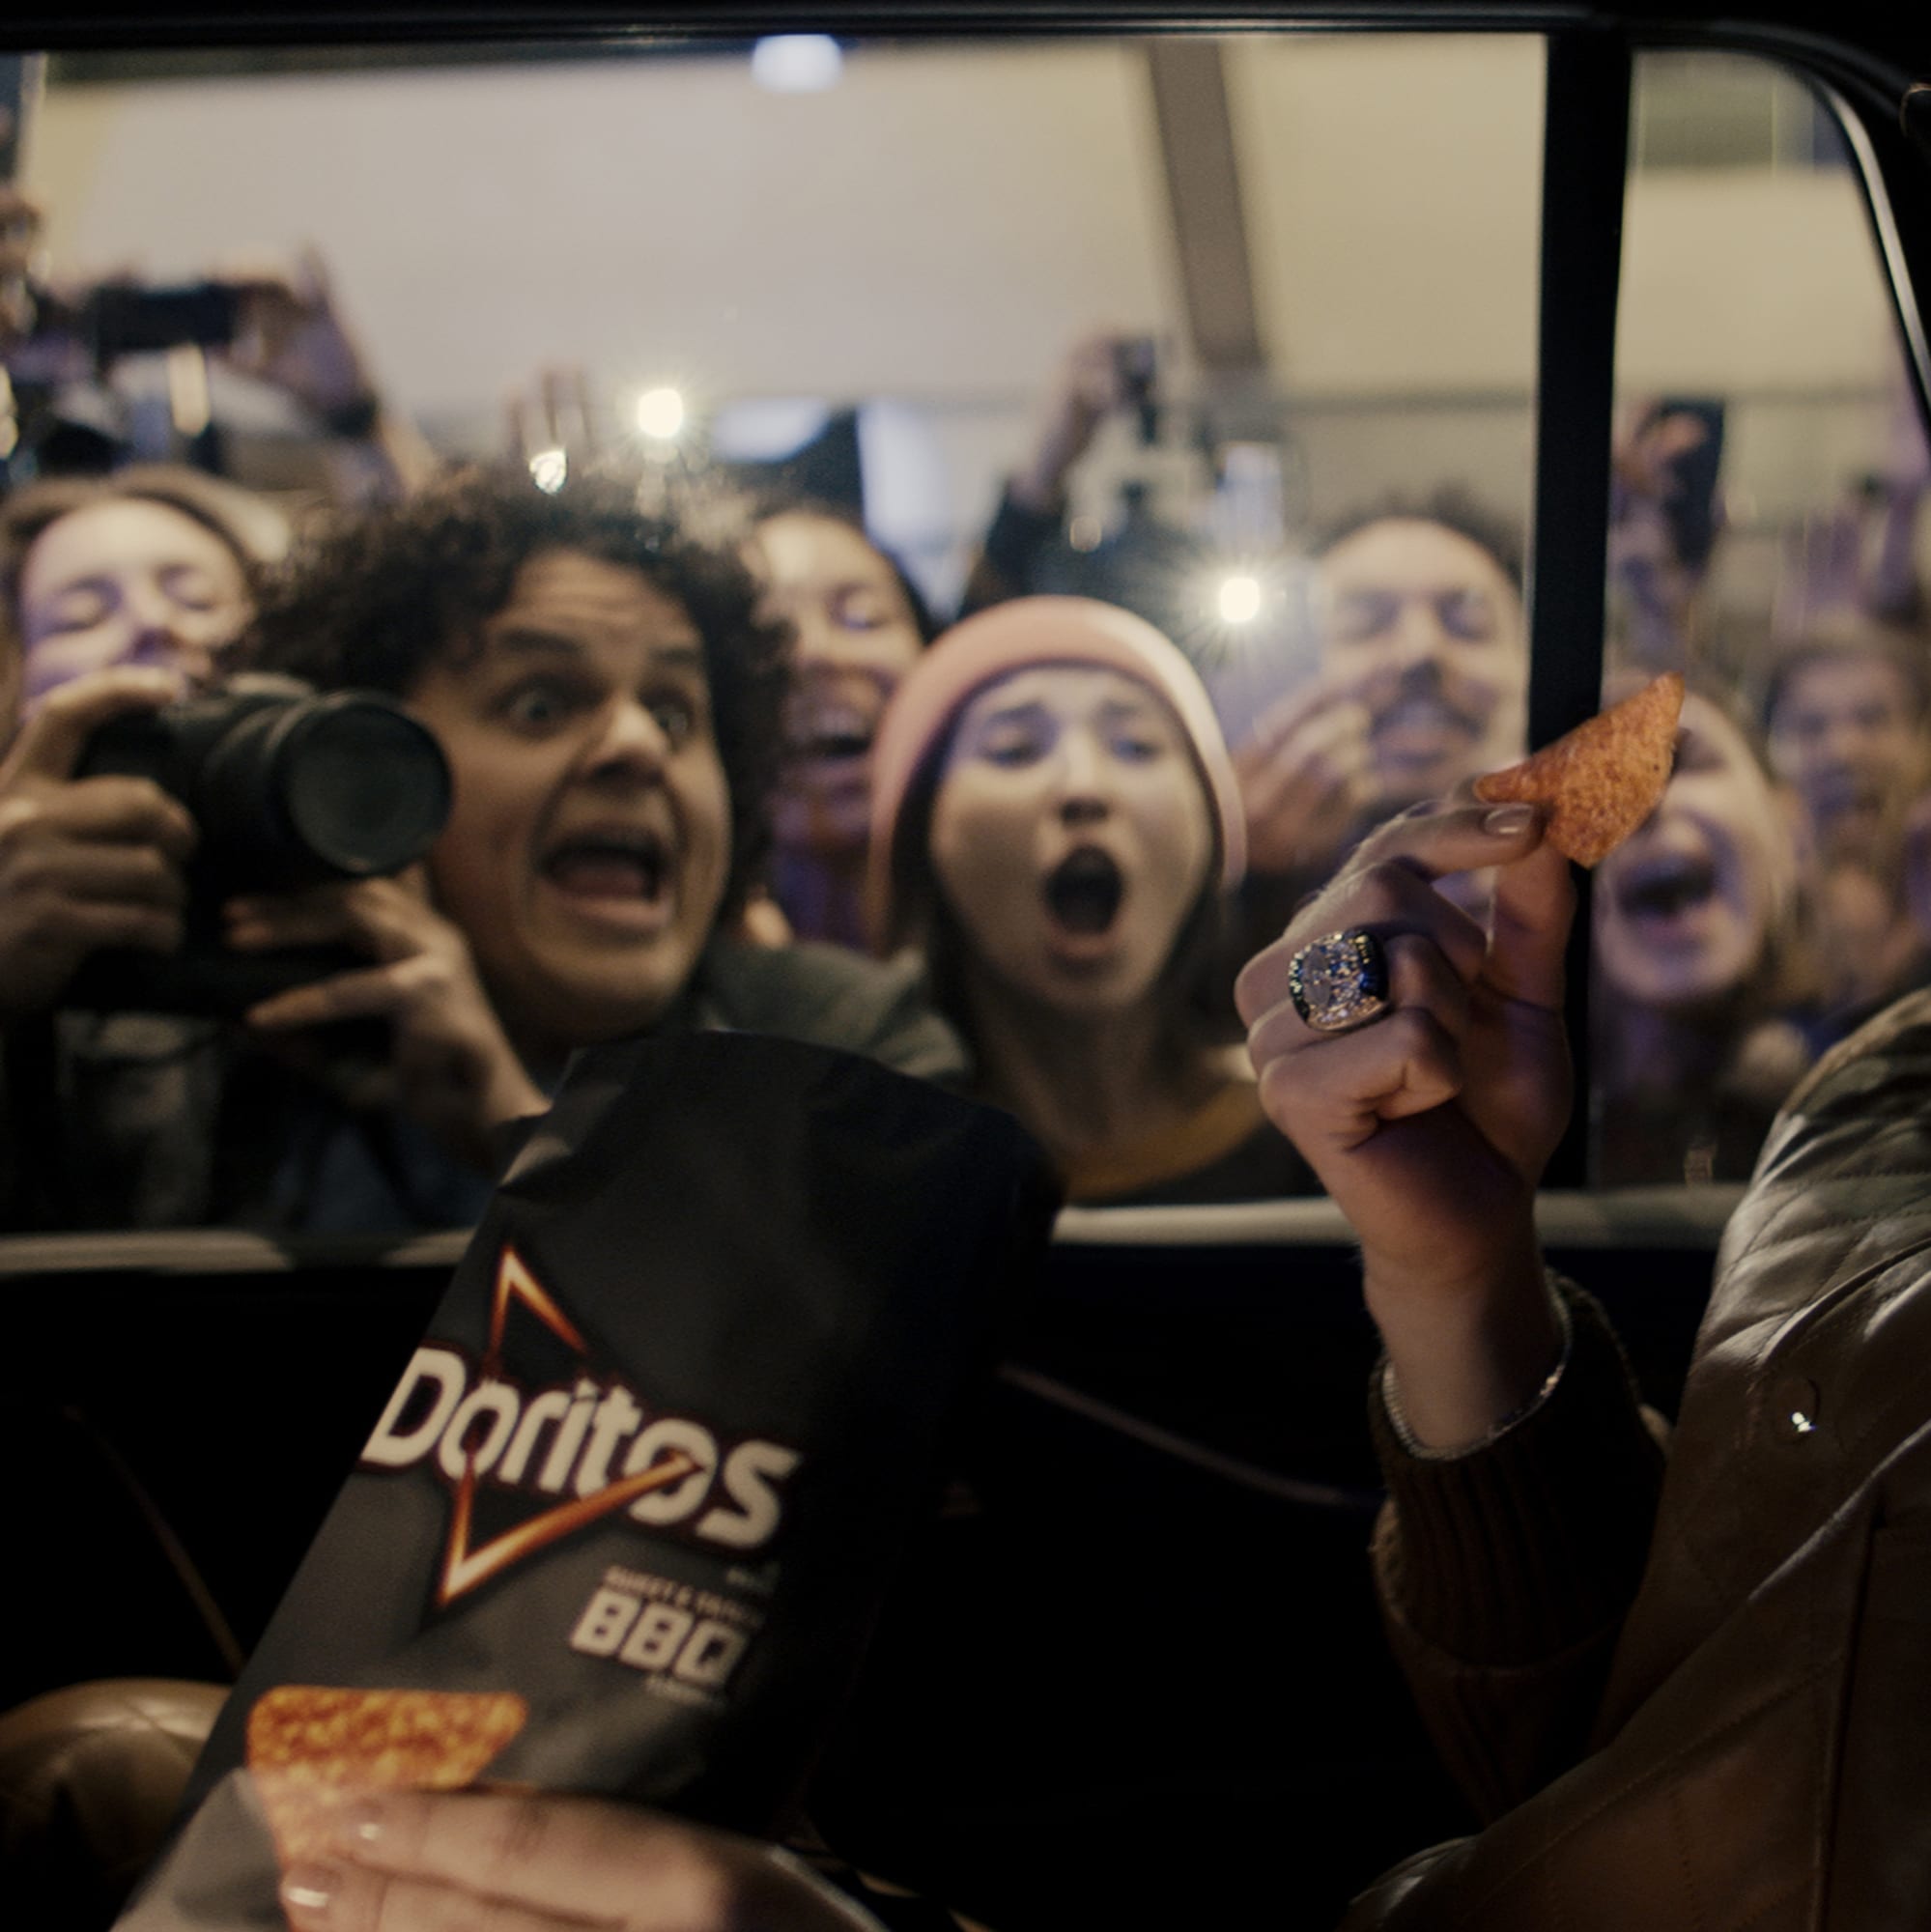 Doritos new commercial takes Super Bowl Sunday to Another Level